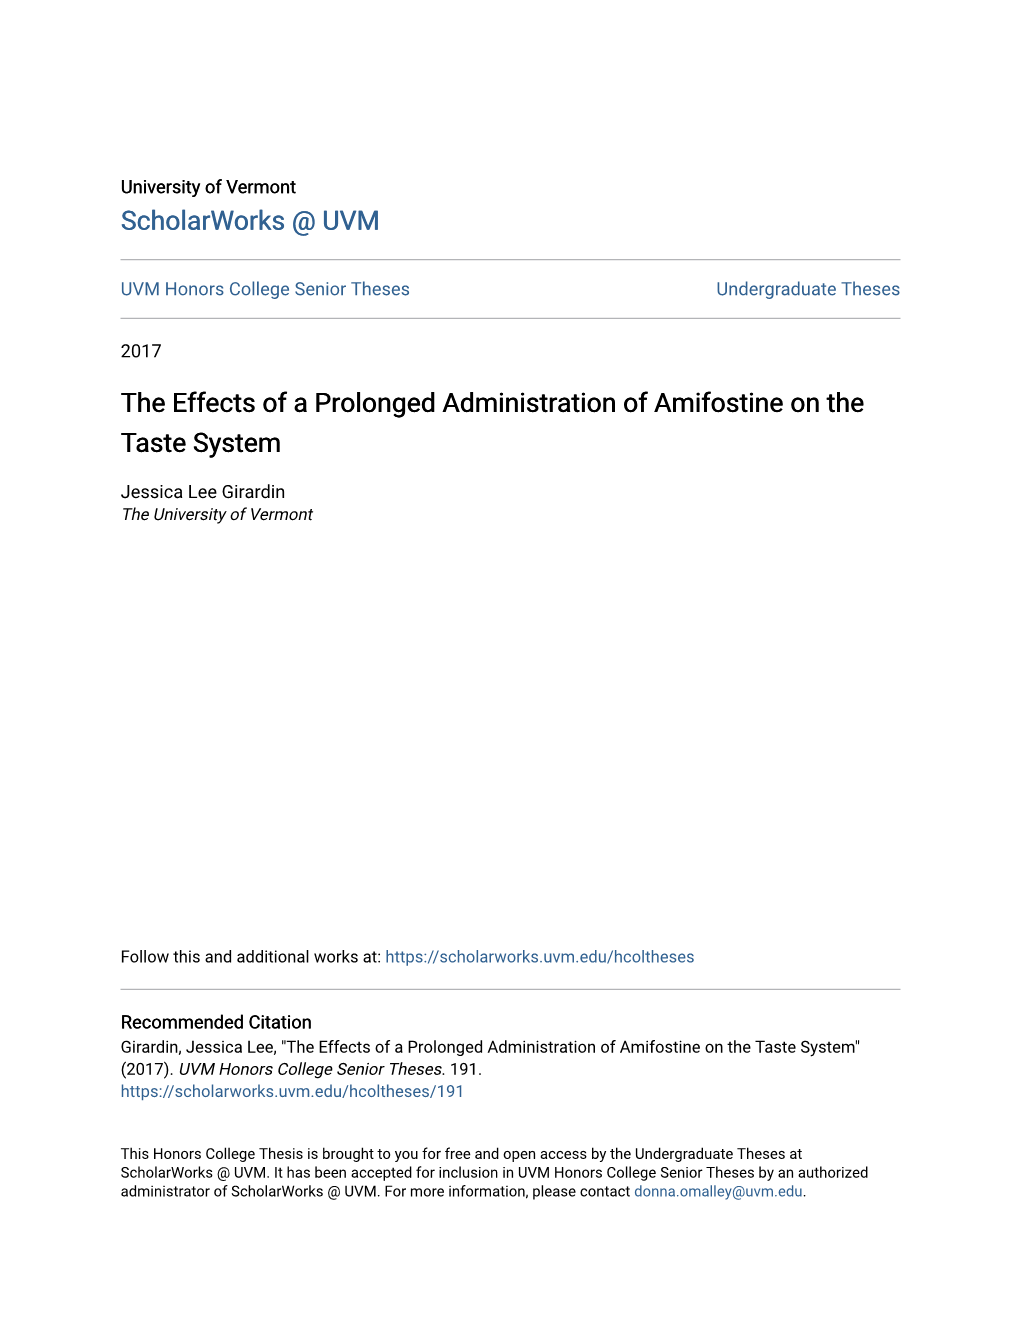 The Effects of a Prolonged Administration of Amifostine on the Taste System